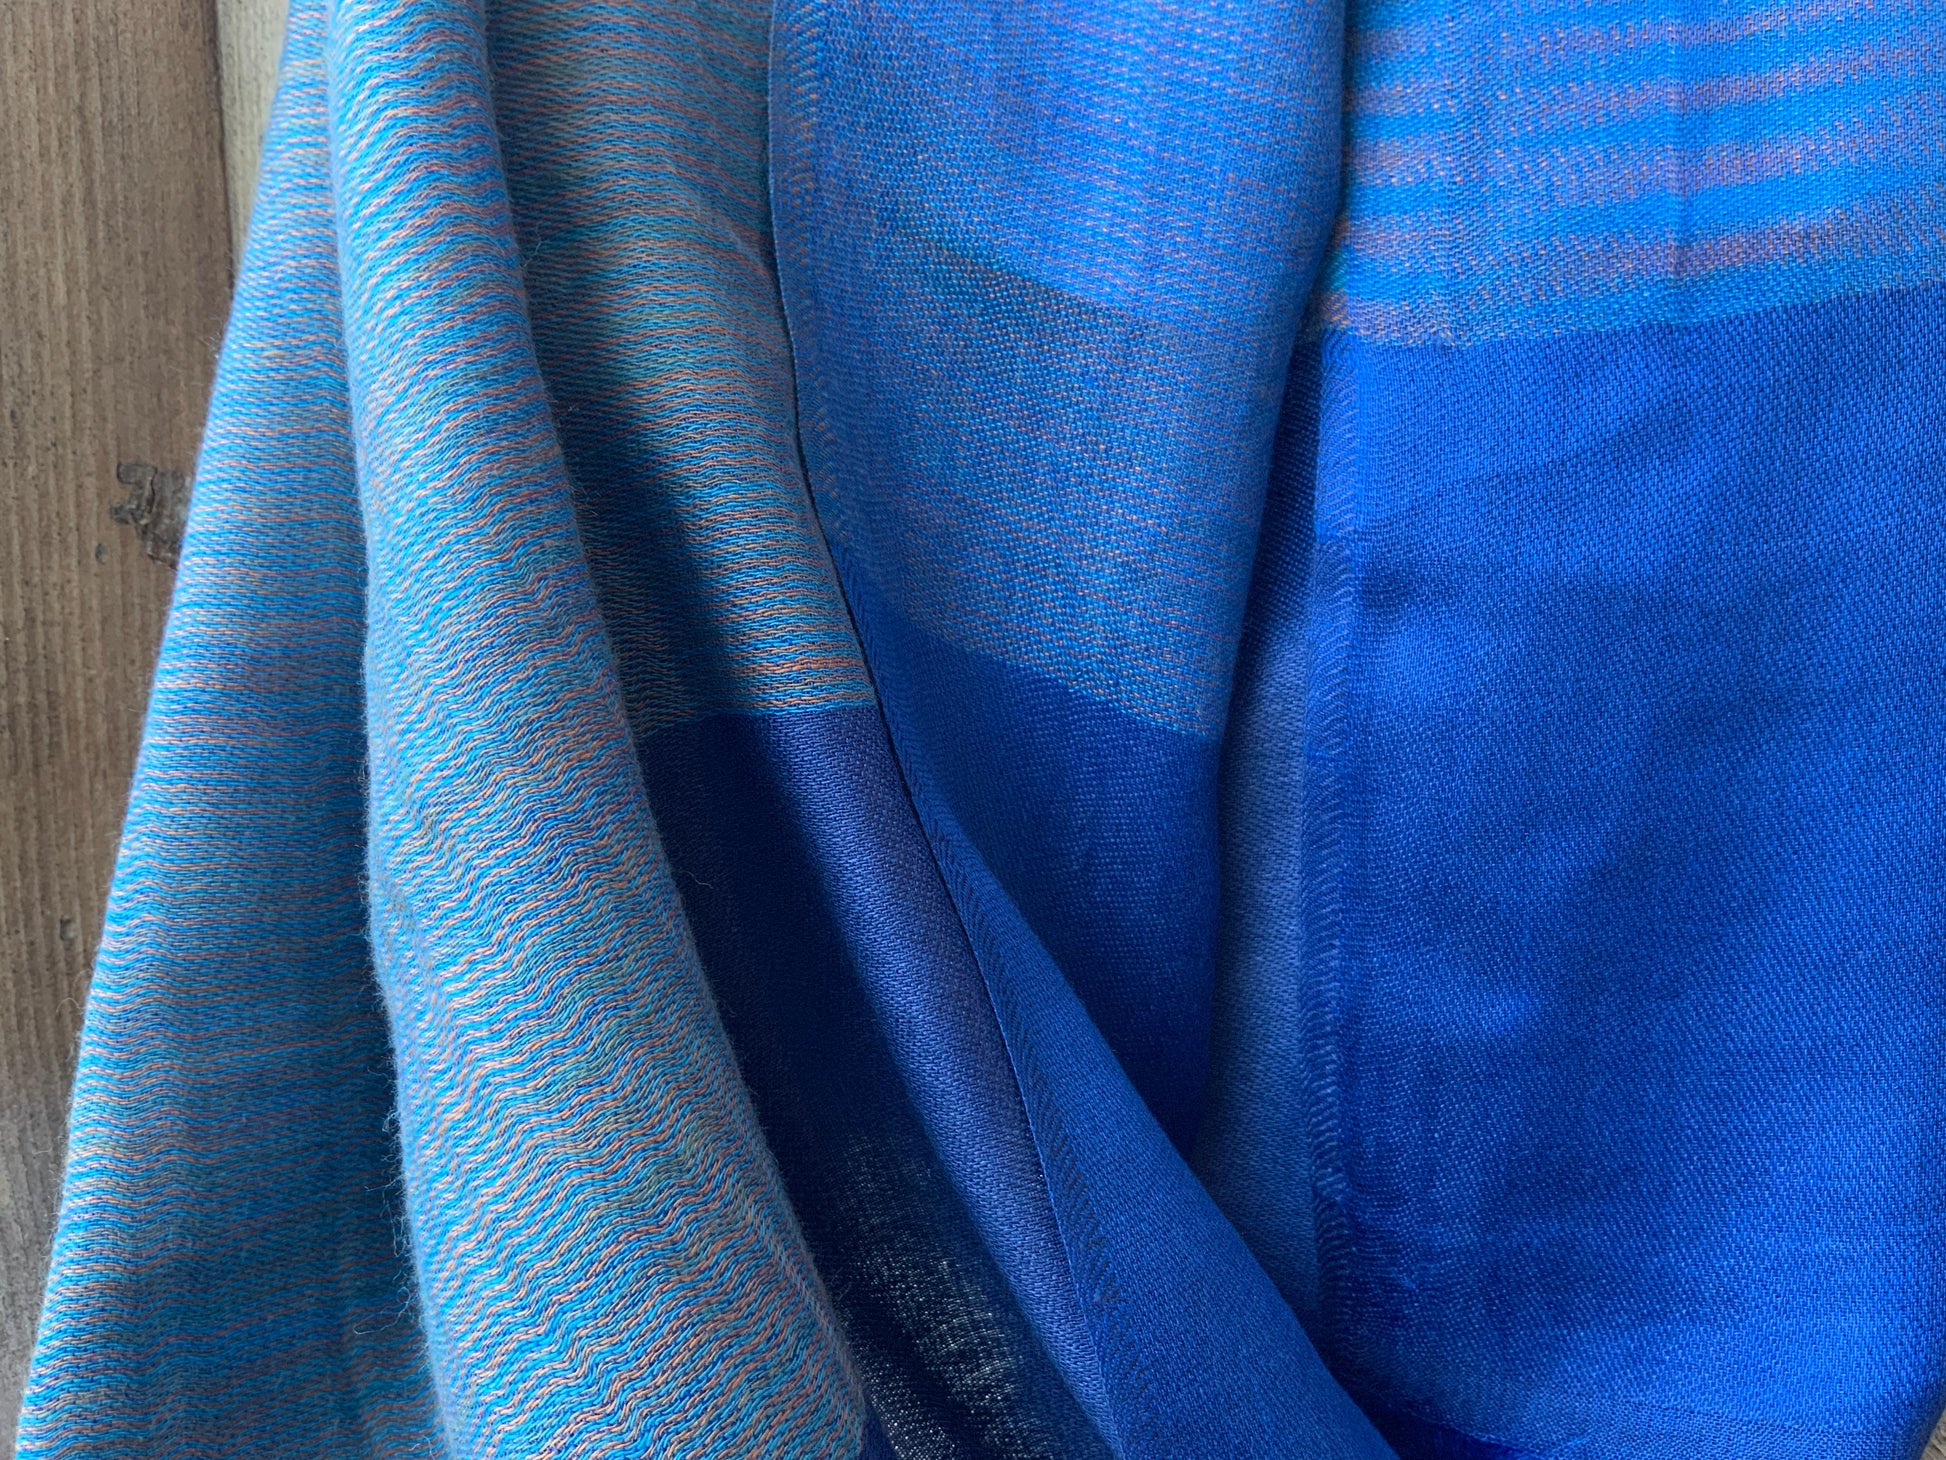 Classic Kashmir shawl in Blue with Copper Highlights #BlueShawl #ClassicShawl #kashmirShawl - DharBazaar